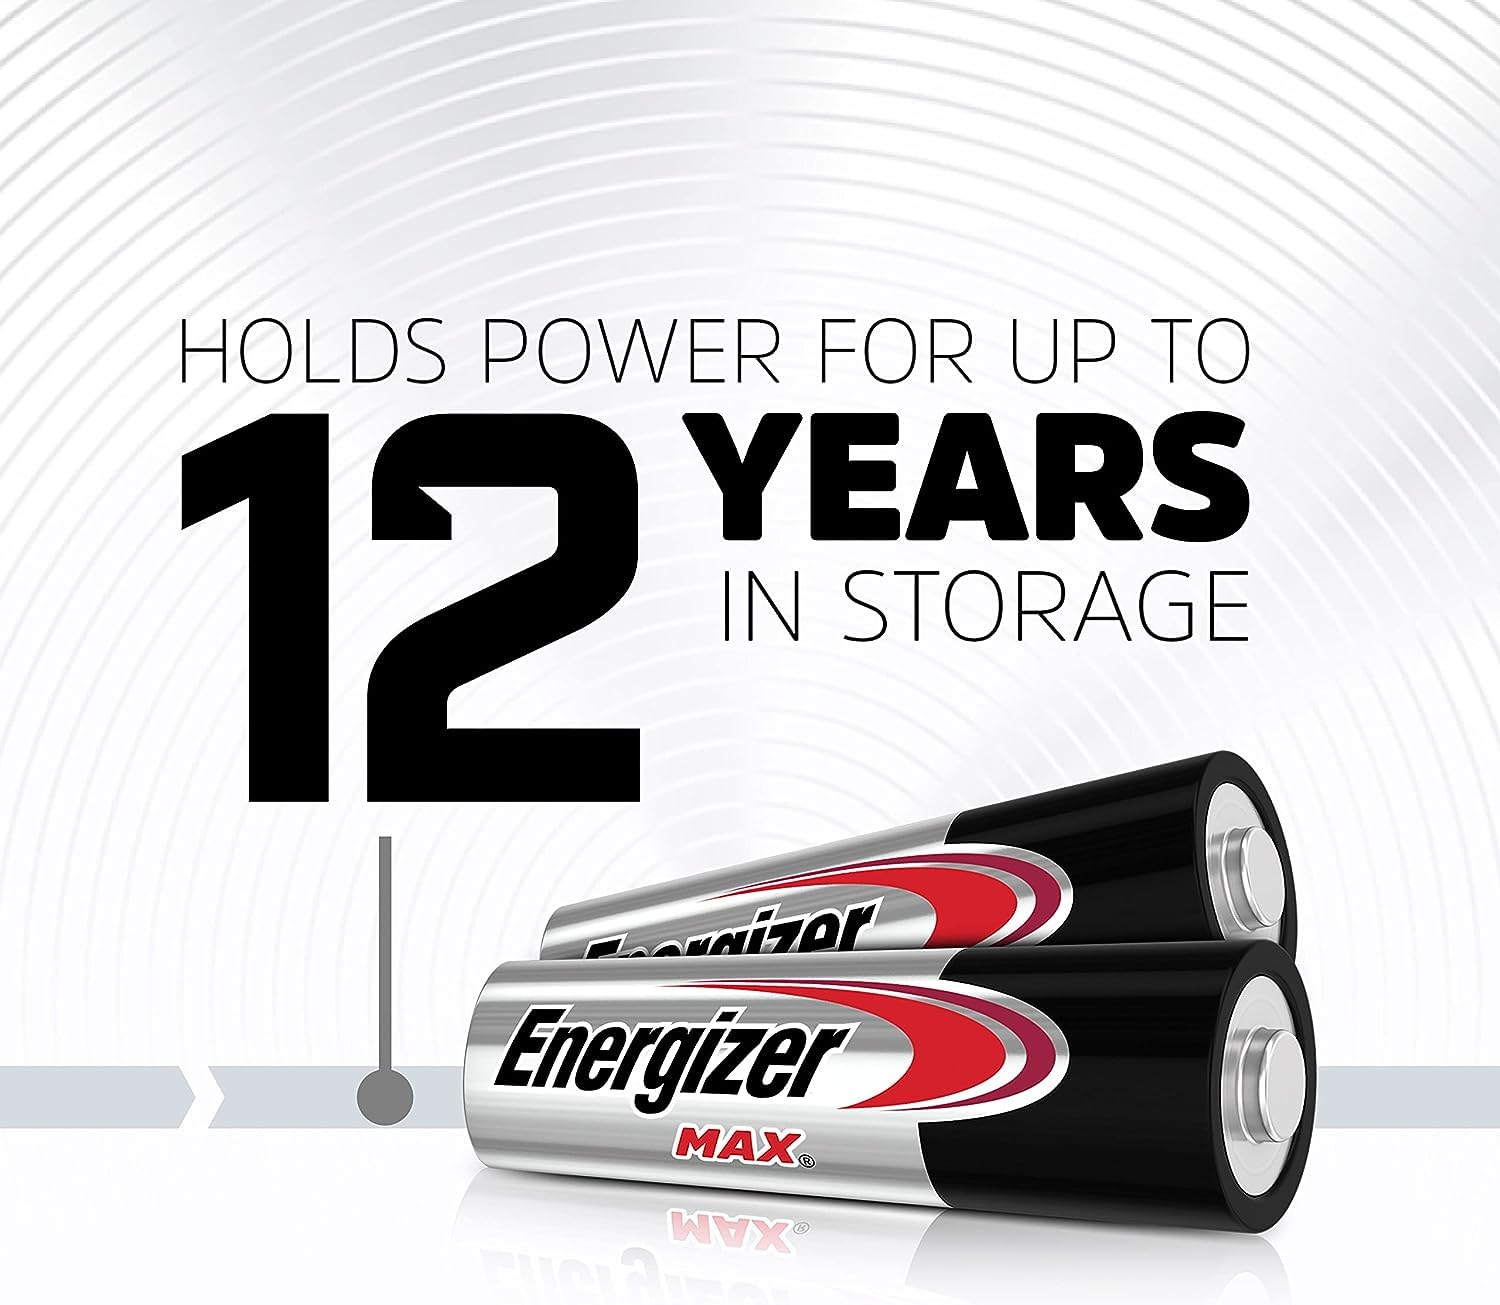 Energizer AA Alkaline Batteries, Max, Long Lasting Double A Batteries Deliver Dependable Power for Everyday use & Emergency situations, Trust in The Brand for Reliable Power and Performance!